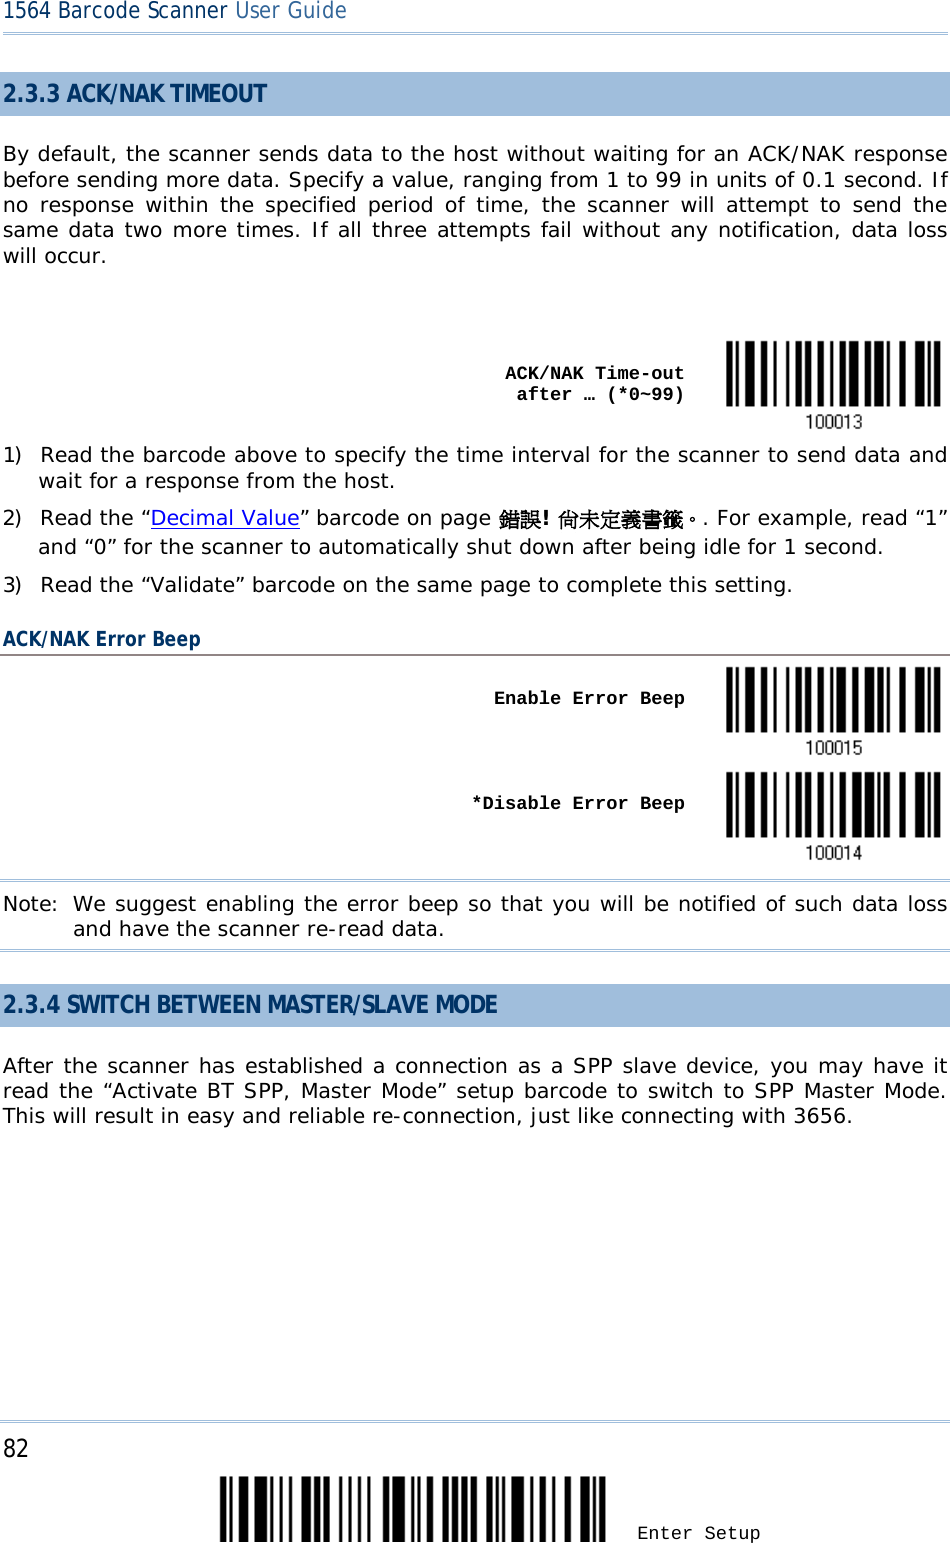 82 Enter Setup 1564 Barcode Scanner User Guide  2.3.3 ACK/NAK TIMEOUT By default, the scanner sends data to the host without waiting for an ACK/NAK response before sending more data. Specify a value, ranging from 1 to 99 in units of 0.1 second. If no response within the specified period of time, the scanner will attempt to send the same data two more times. If all three attempts fail without any notification, data loss will occur.     ACK/NAK Time-out after … (*0~99)  1) Read the barcode above to specify the time interval for the scanner to send data and wait for a response from the host.       2) Read the “Decimal Value” barcode on page 錯誤! 尚未定義書籤。. For example, read “1” and “0” for the scanner to automatically shut down after being idle for 1 second.  3) Read the “Validate” barcode on the same page to complete this setting. ACK/NAK Error Beep    Enable Error Beep       *Disable Error Beep  Note: We suggest enabling the error beep so that you will be notified of such data loss and have the scanner re-read data. 2.3.4 SWITCH BETWEEN MASTER/SLAVE MODE After the scanner has established a connection as a SPP slave device, you may have it read the “Activate BT SPP, Master Mode” setup barcode to switch to SPP Master Mode. This will result in easy and reliable re-connection, just like connecting with 3656.   